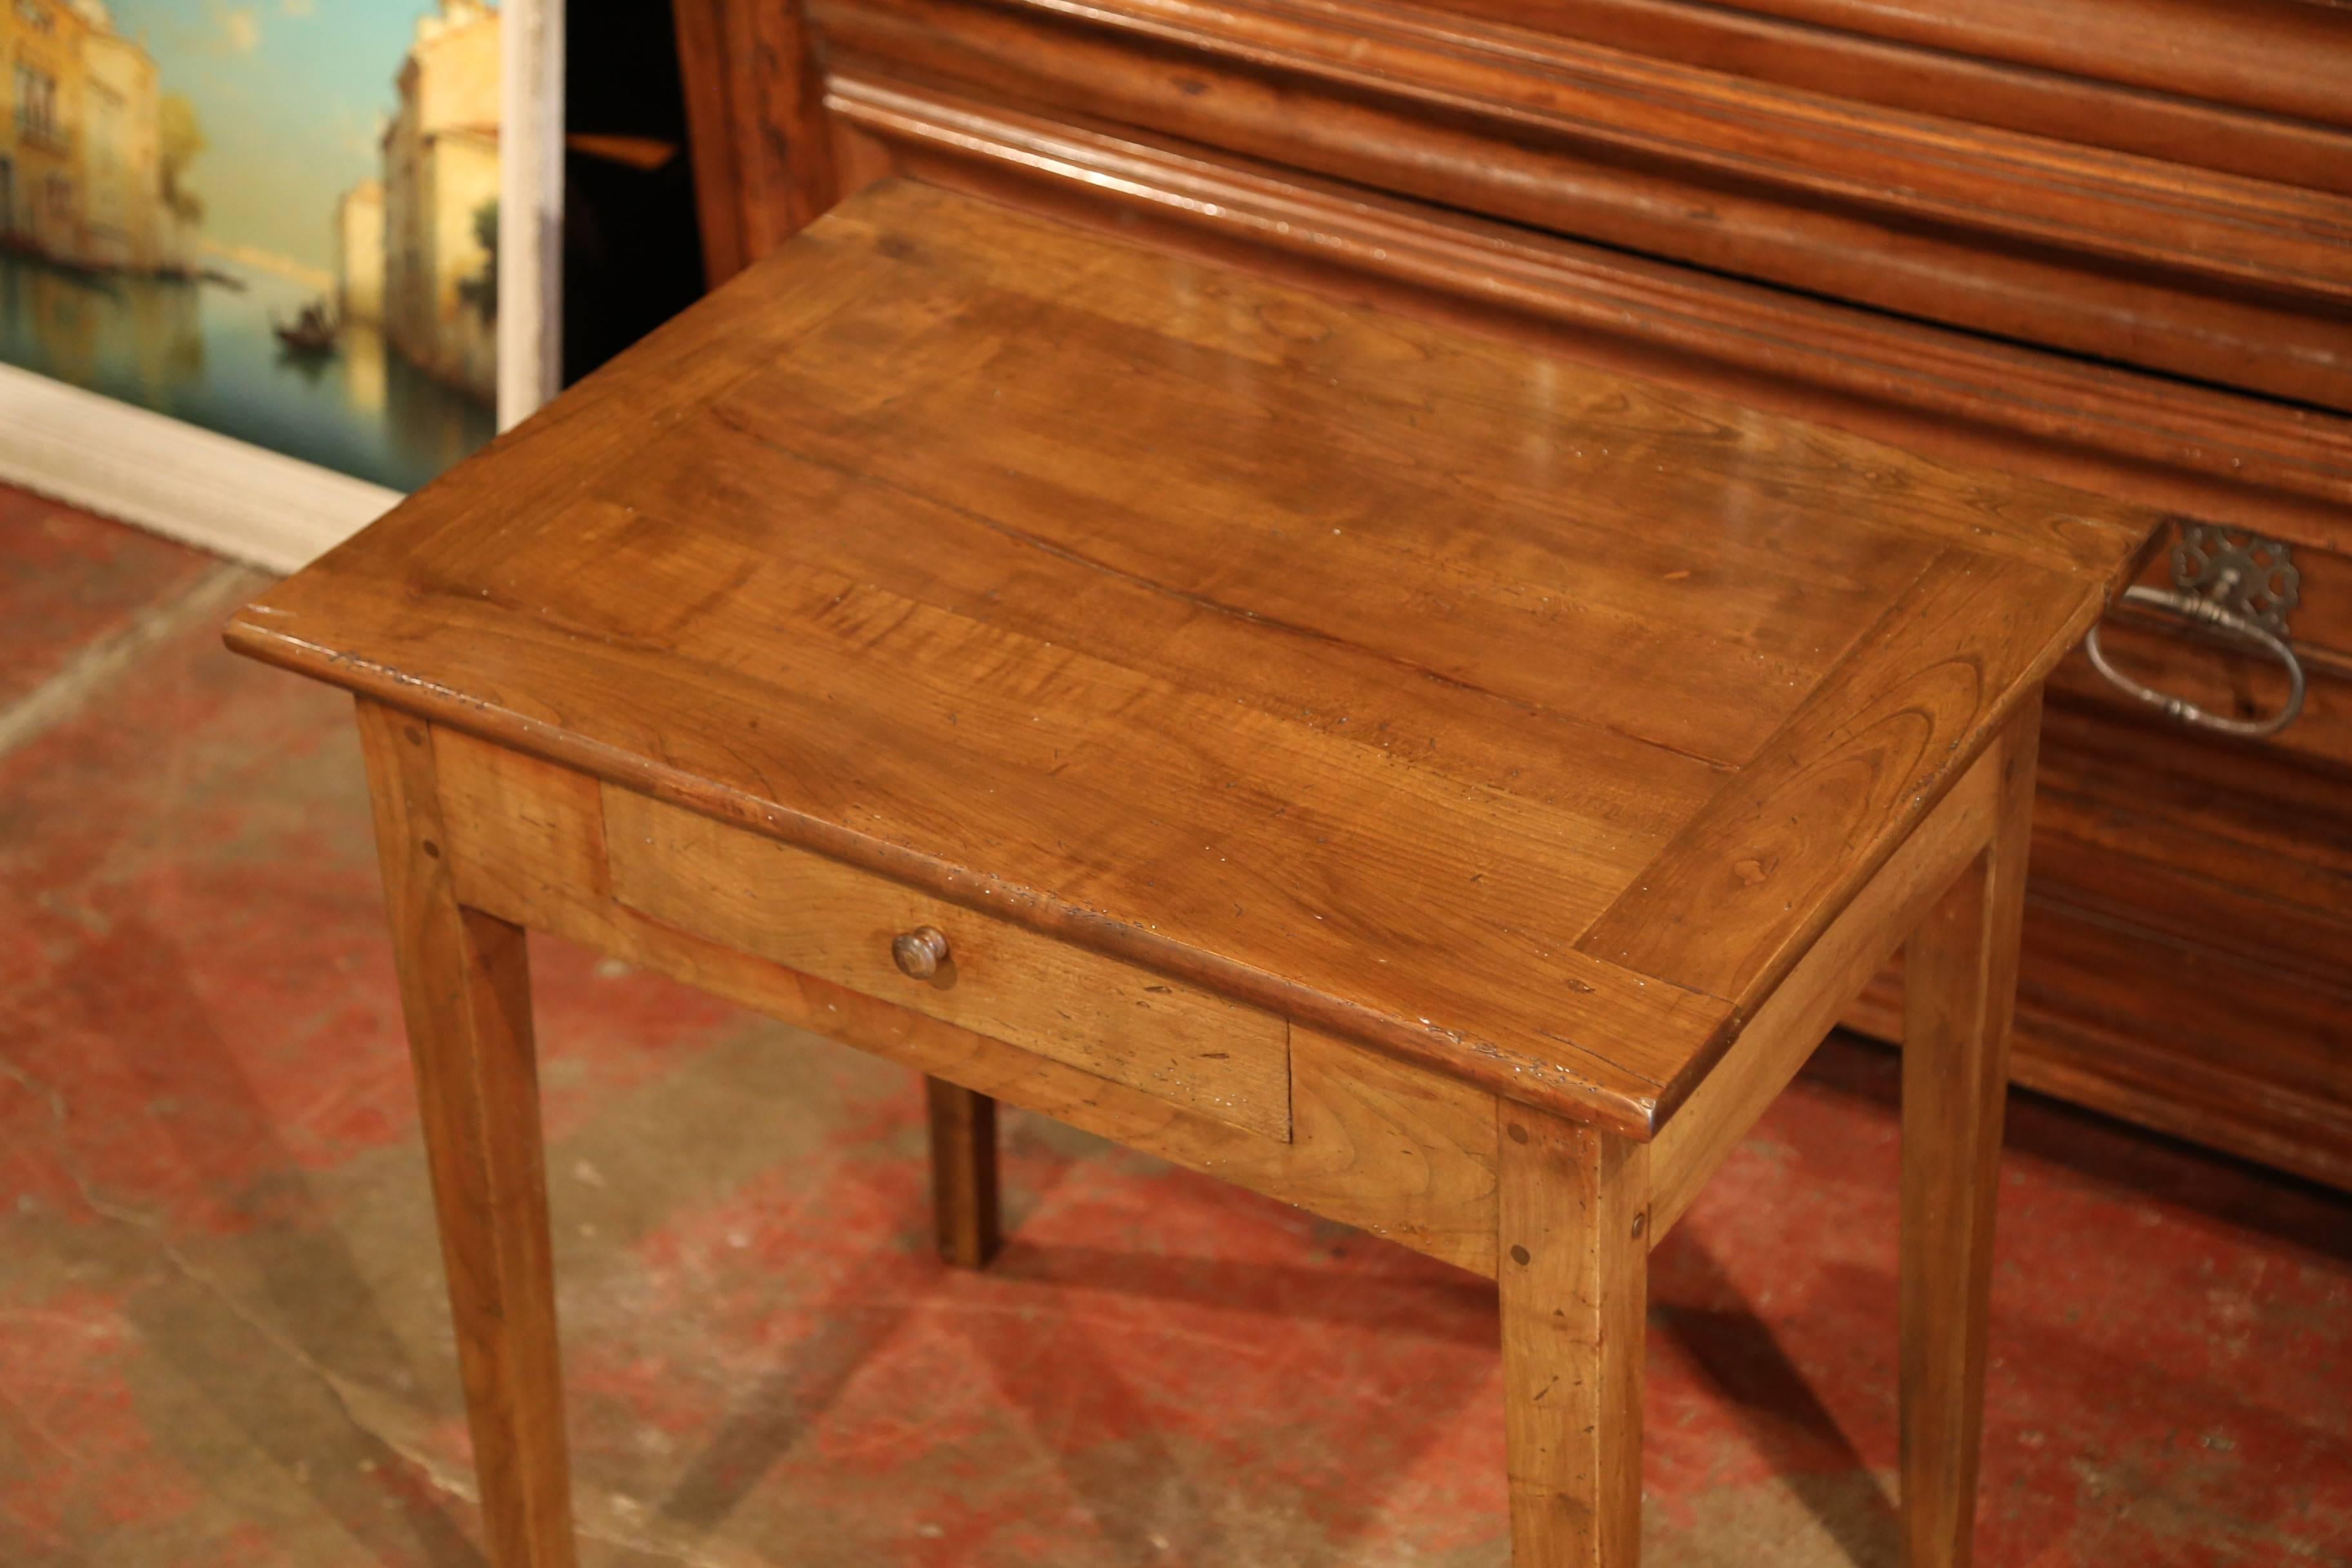 This versatile, antique fruit wood end table was carved in the Poitou region of France, circa 1860. The small desk features a drawer across the front and four slim, tapered legs. This traditional piece is in excellent condition with a rich walnut